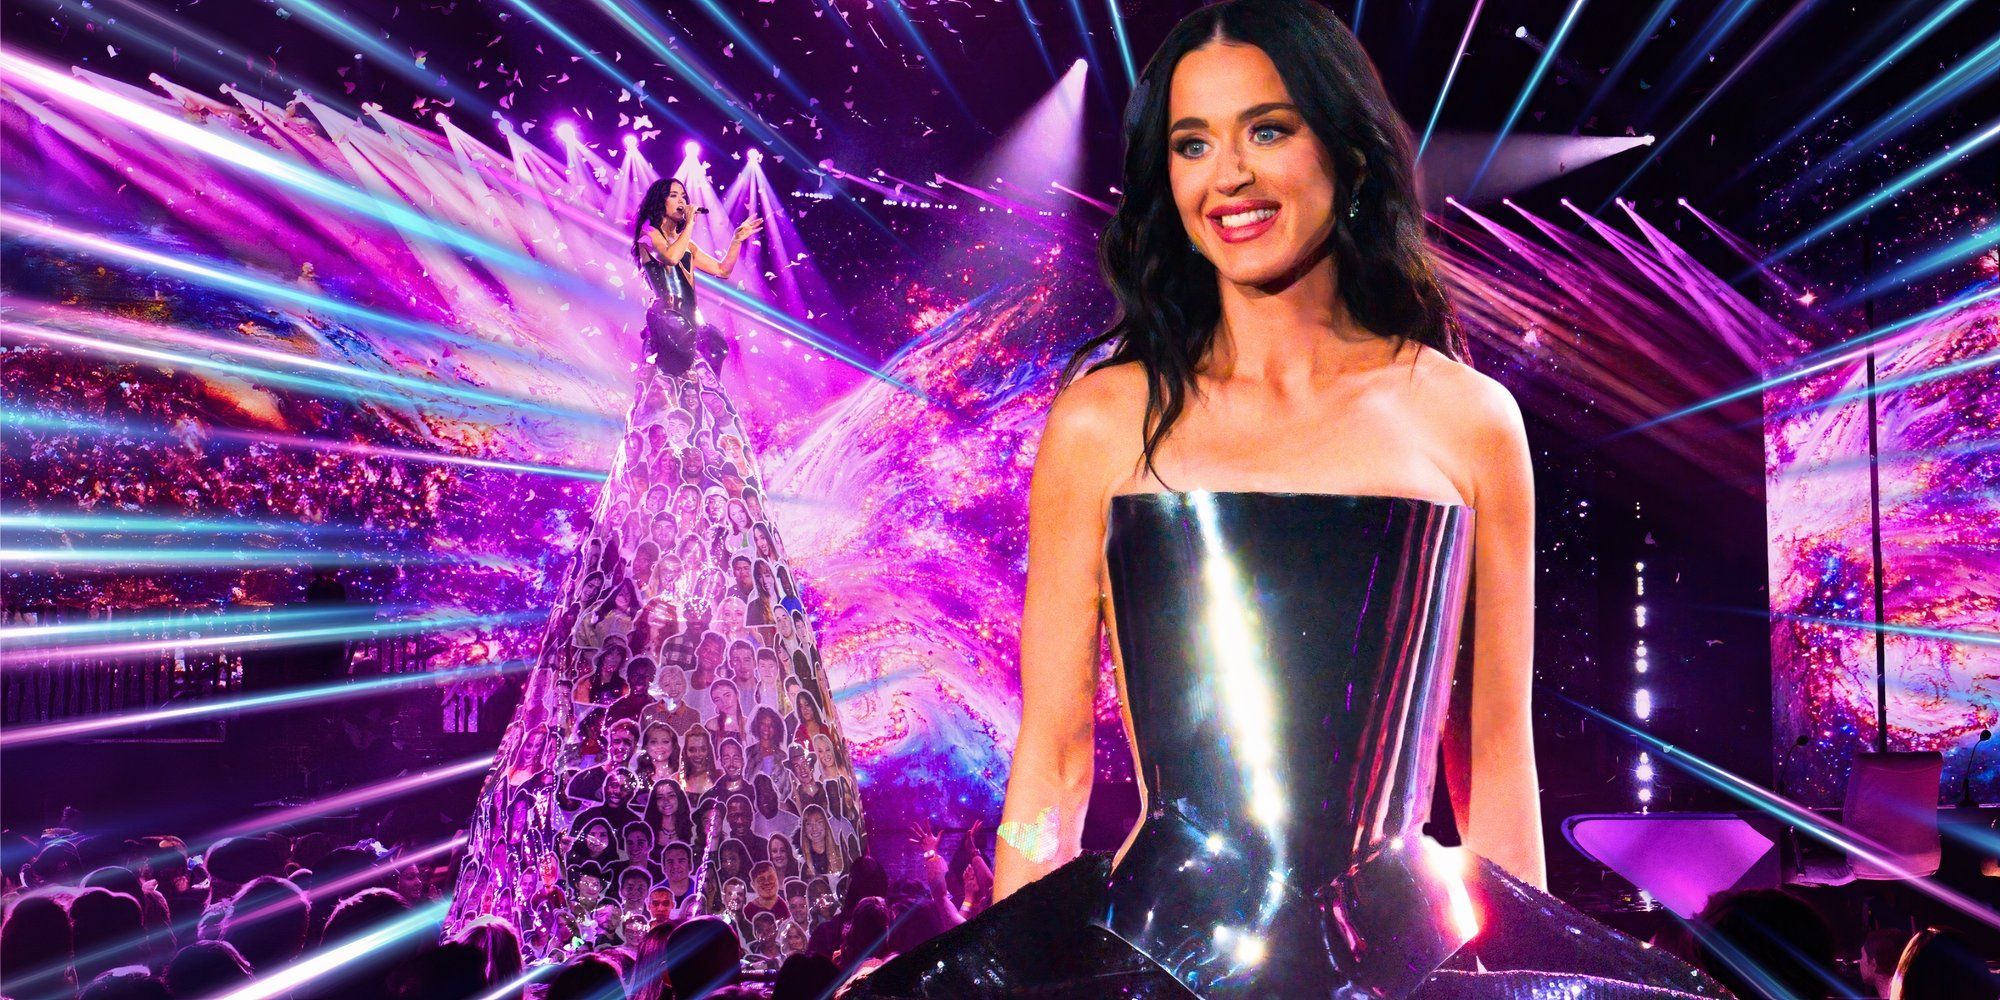 American Idol’s Katy Perry smiles while wearing large dress featuring contestants.